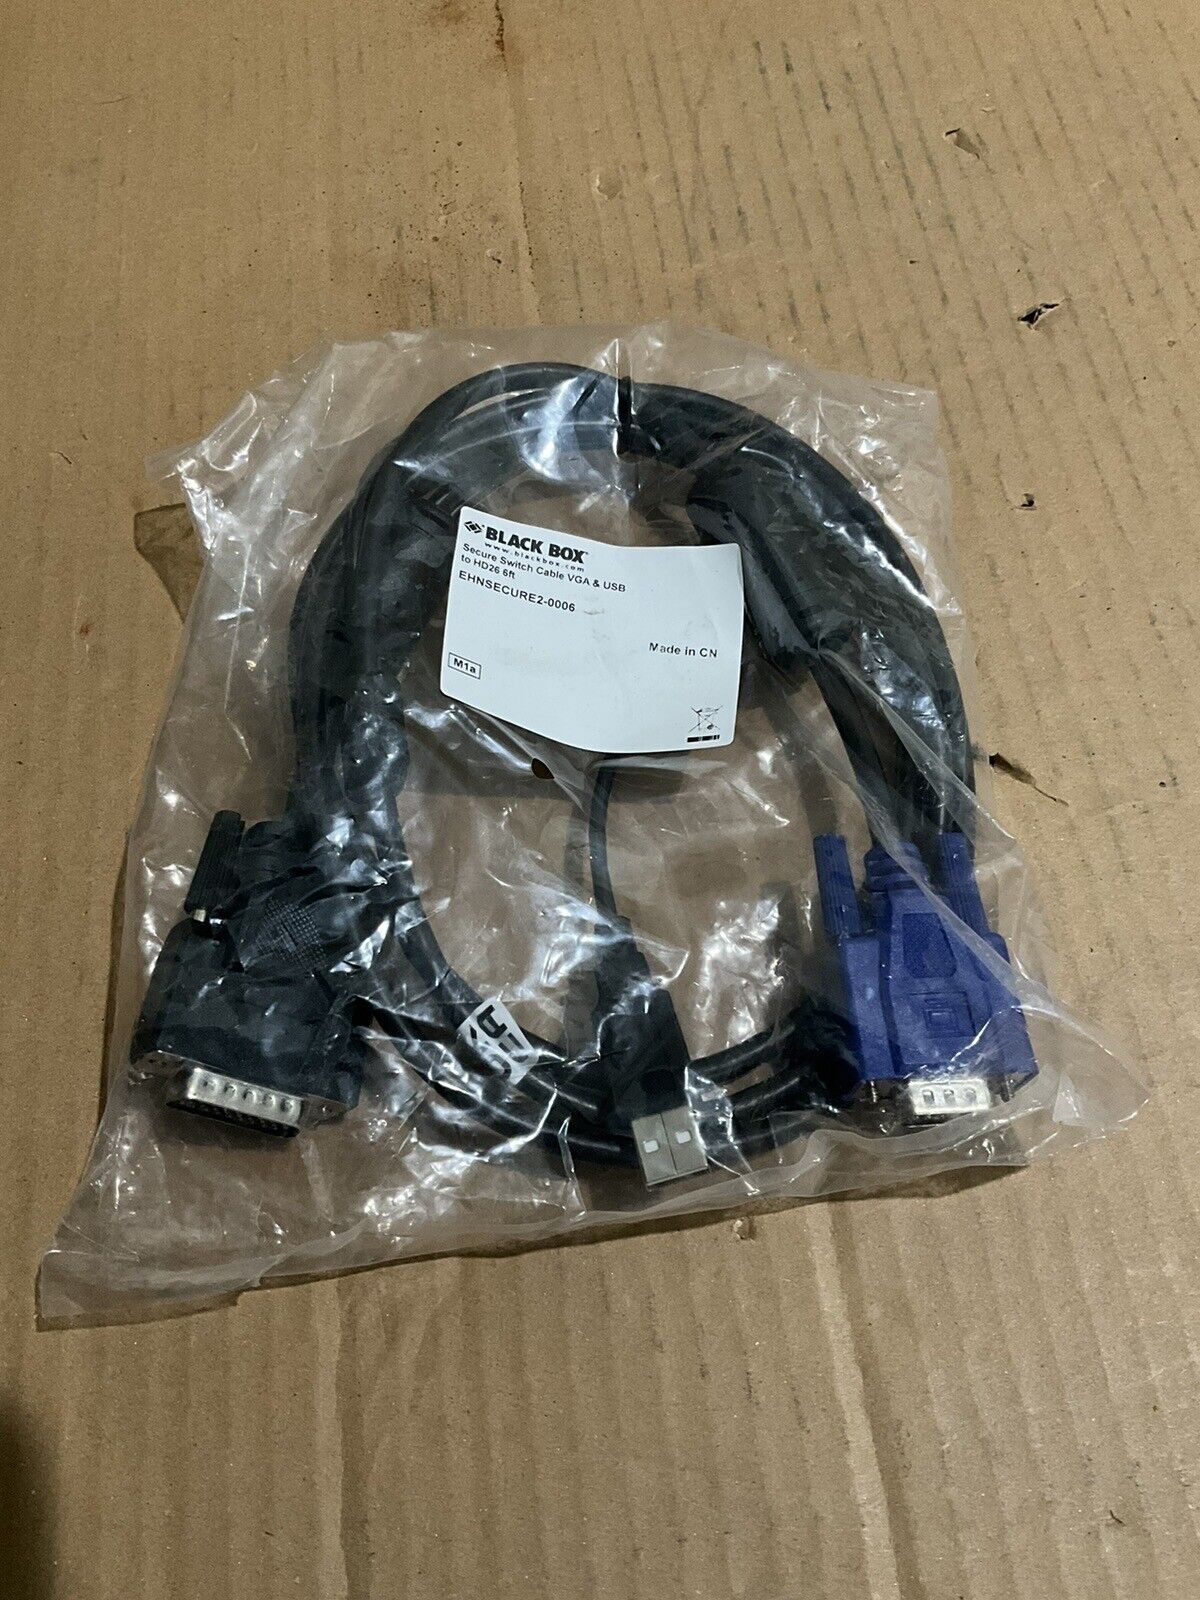 NEW BLACK BOX SECURE SWITCH CABLE VGA & USB TO HD26 6FT 